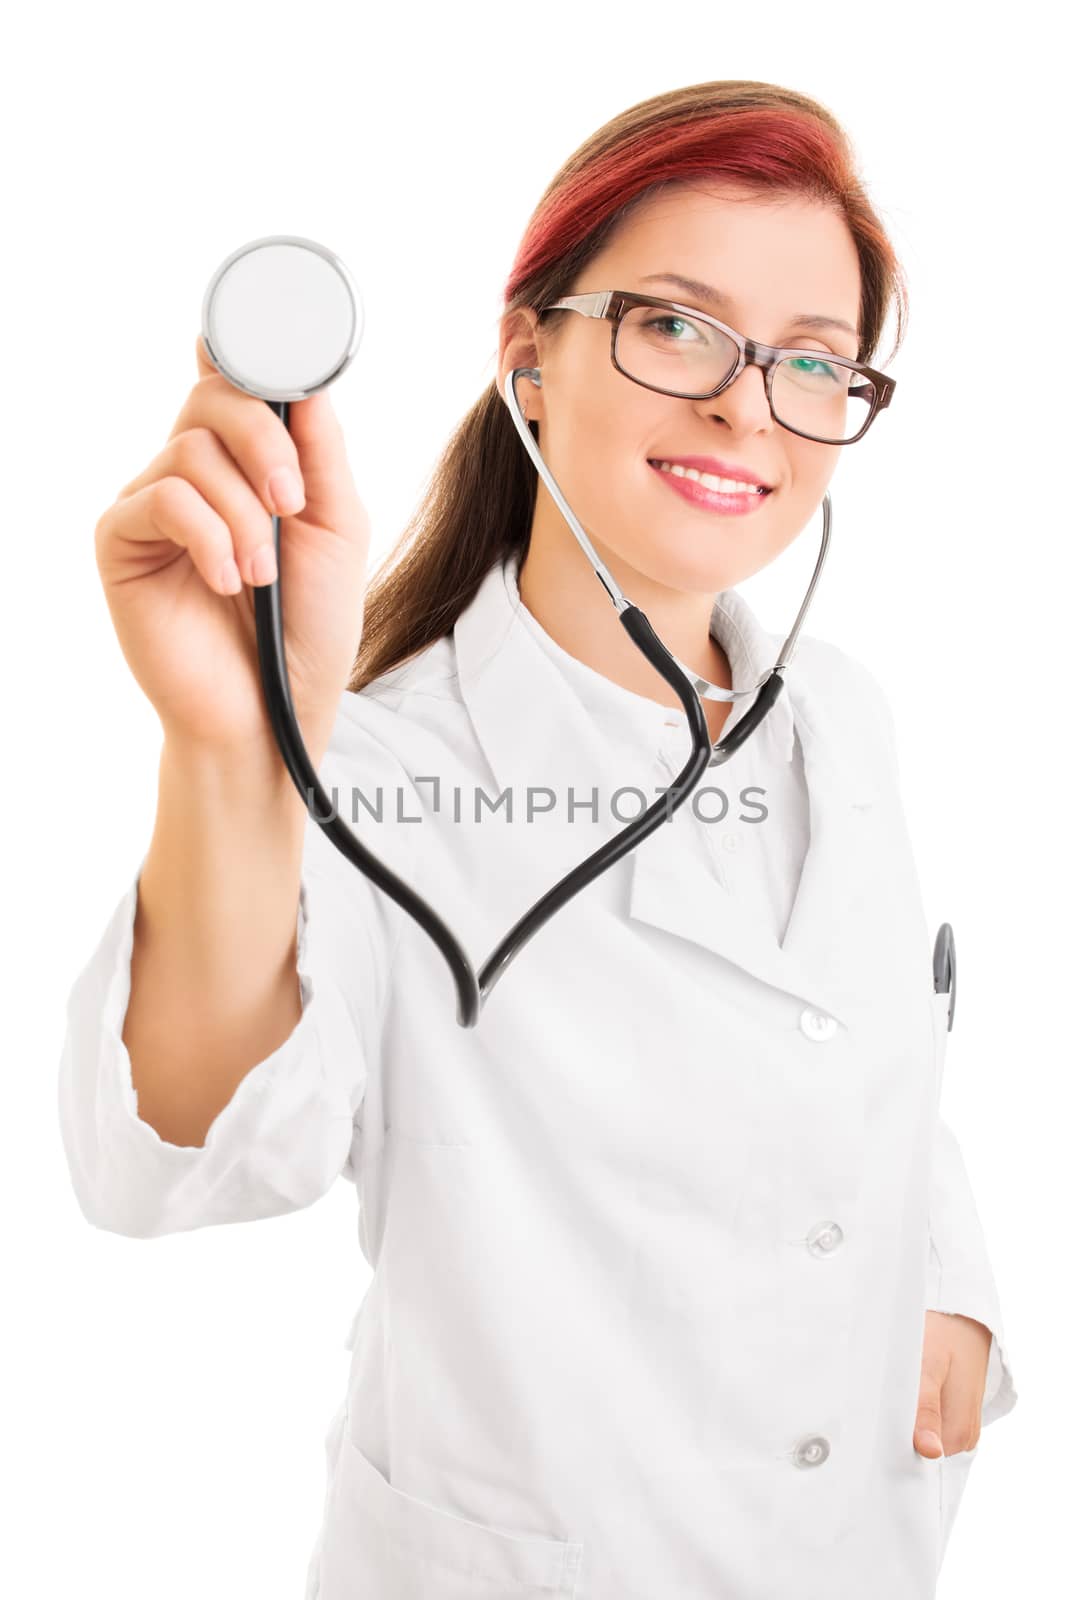 Portrait of a smiling young female health care professional or doctor or nurse with glasses holding stethoscope pointed toward camera, isolated on white background. Listening to your heart.